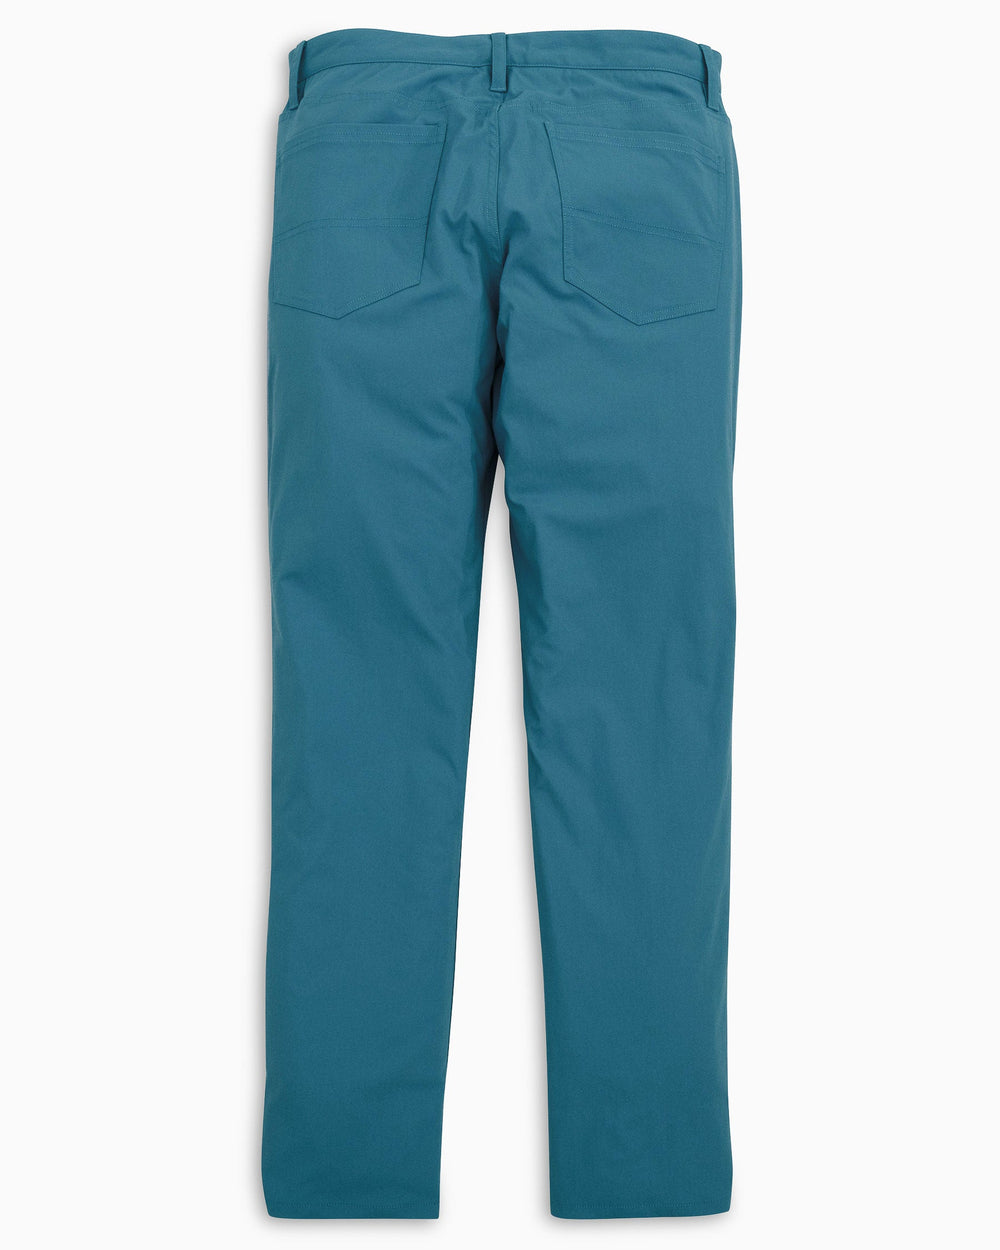 The back view of the Men's Intercoastal Pant by Southern Tide - Porto Blue